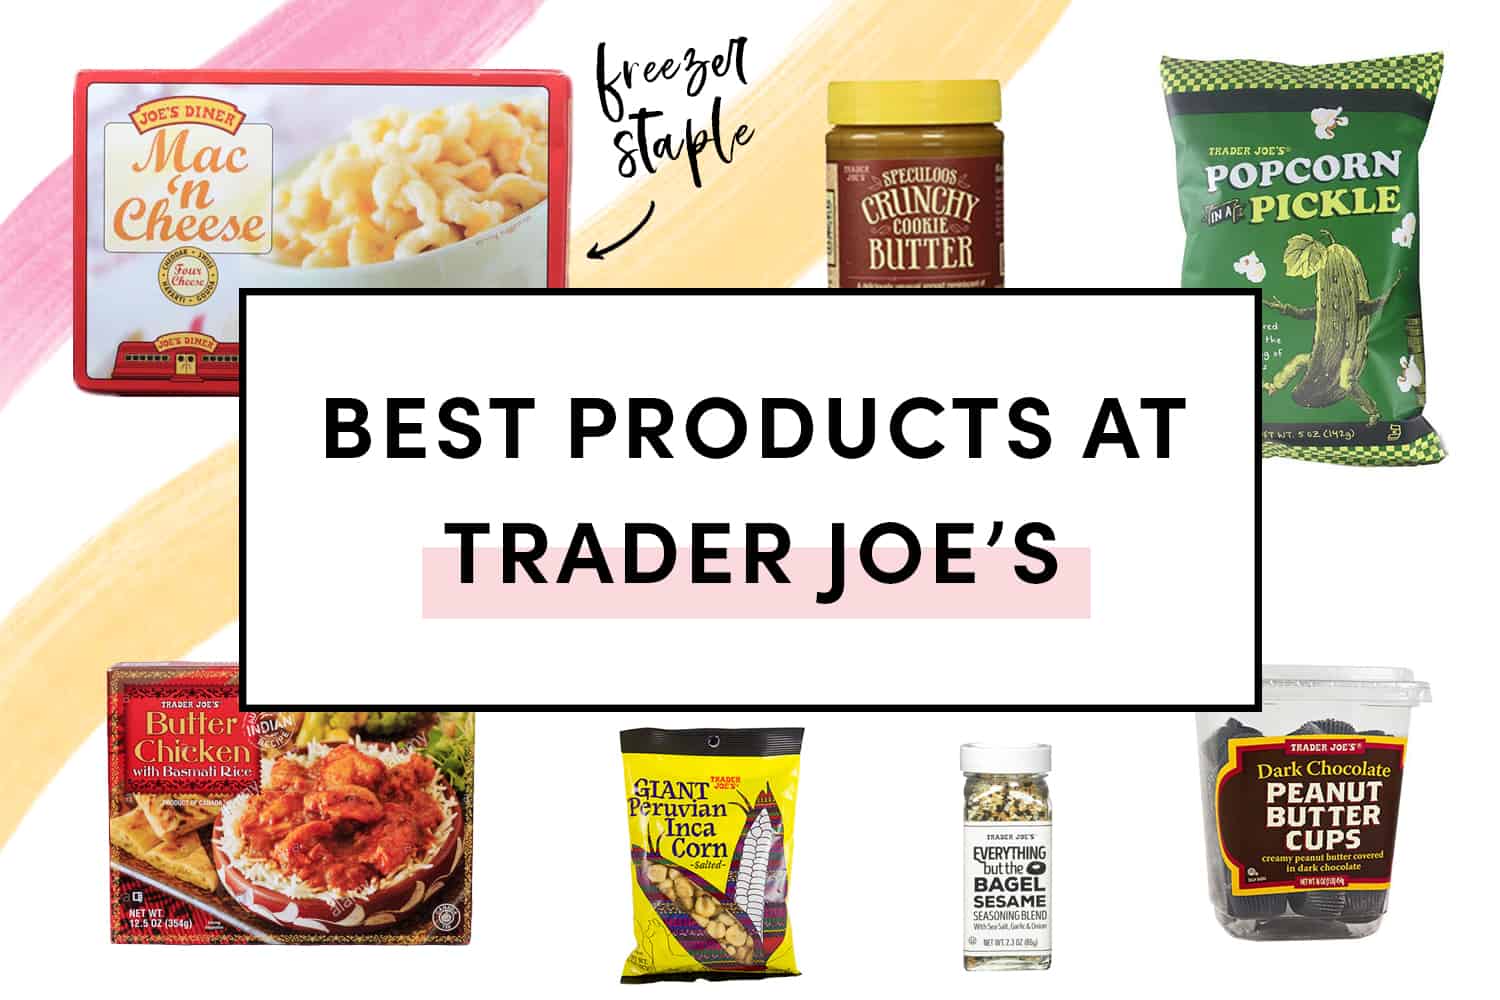 23 Best Products At Trader Joe's With Photos (Updated 2023)